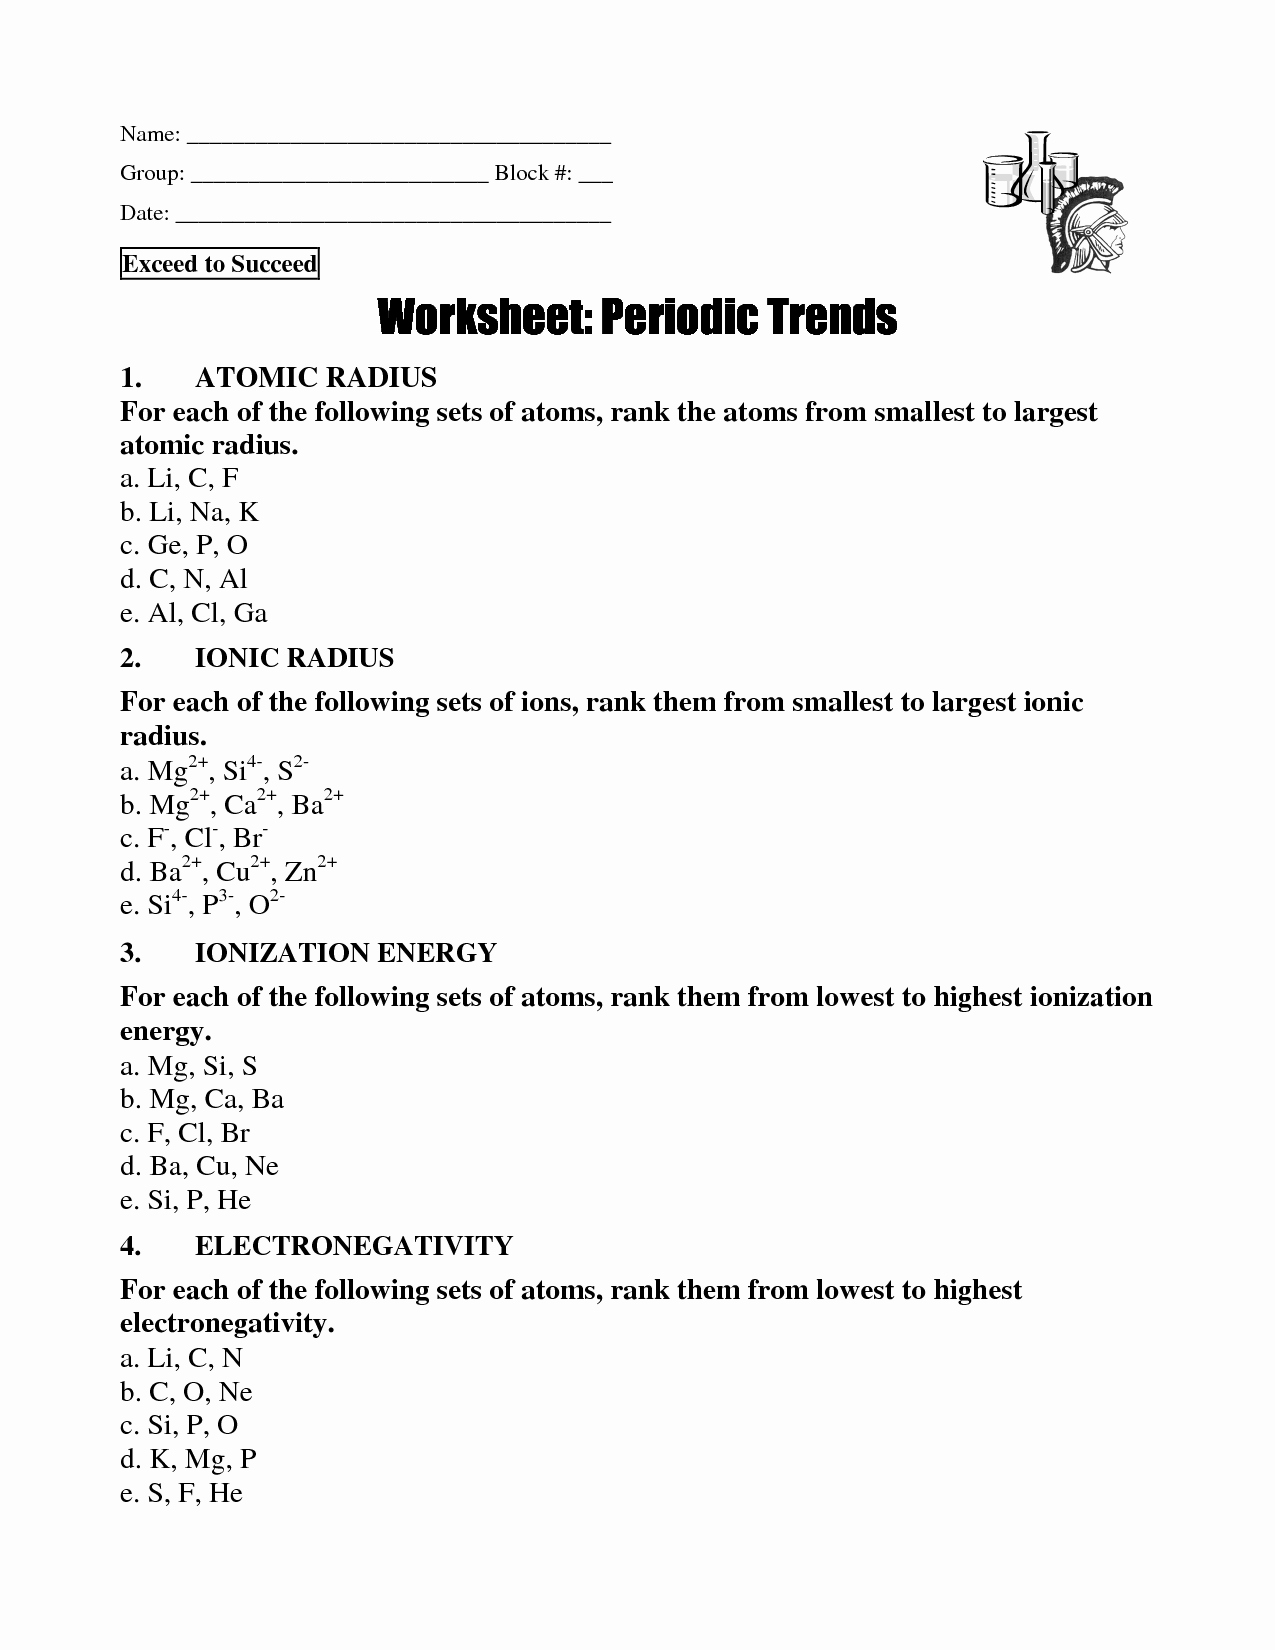 Periodic Trends Worksheet Answers Awesome 20 Best Of Periodic Trends Worksheet Answers Key